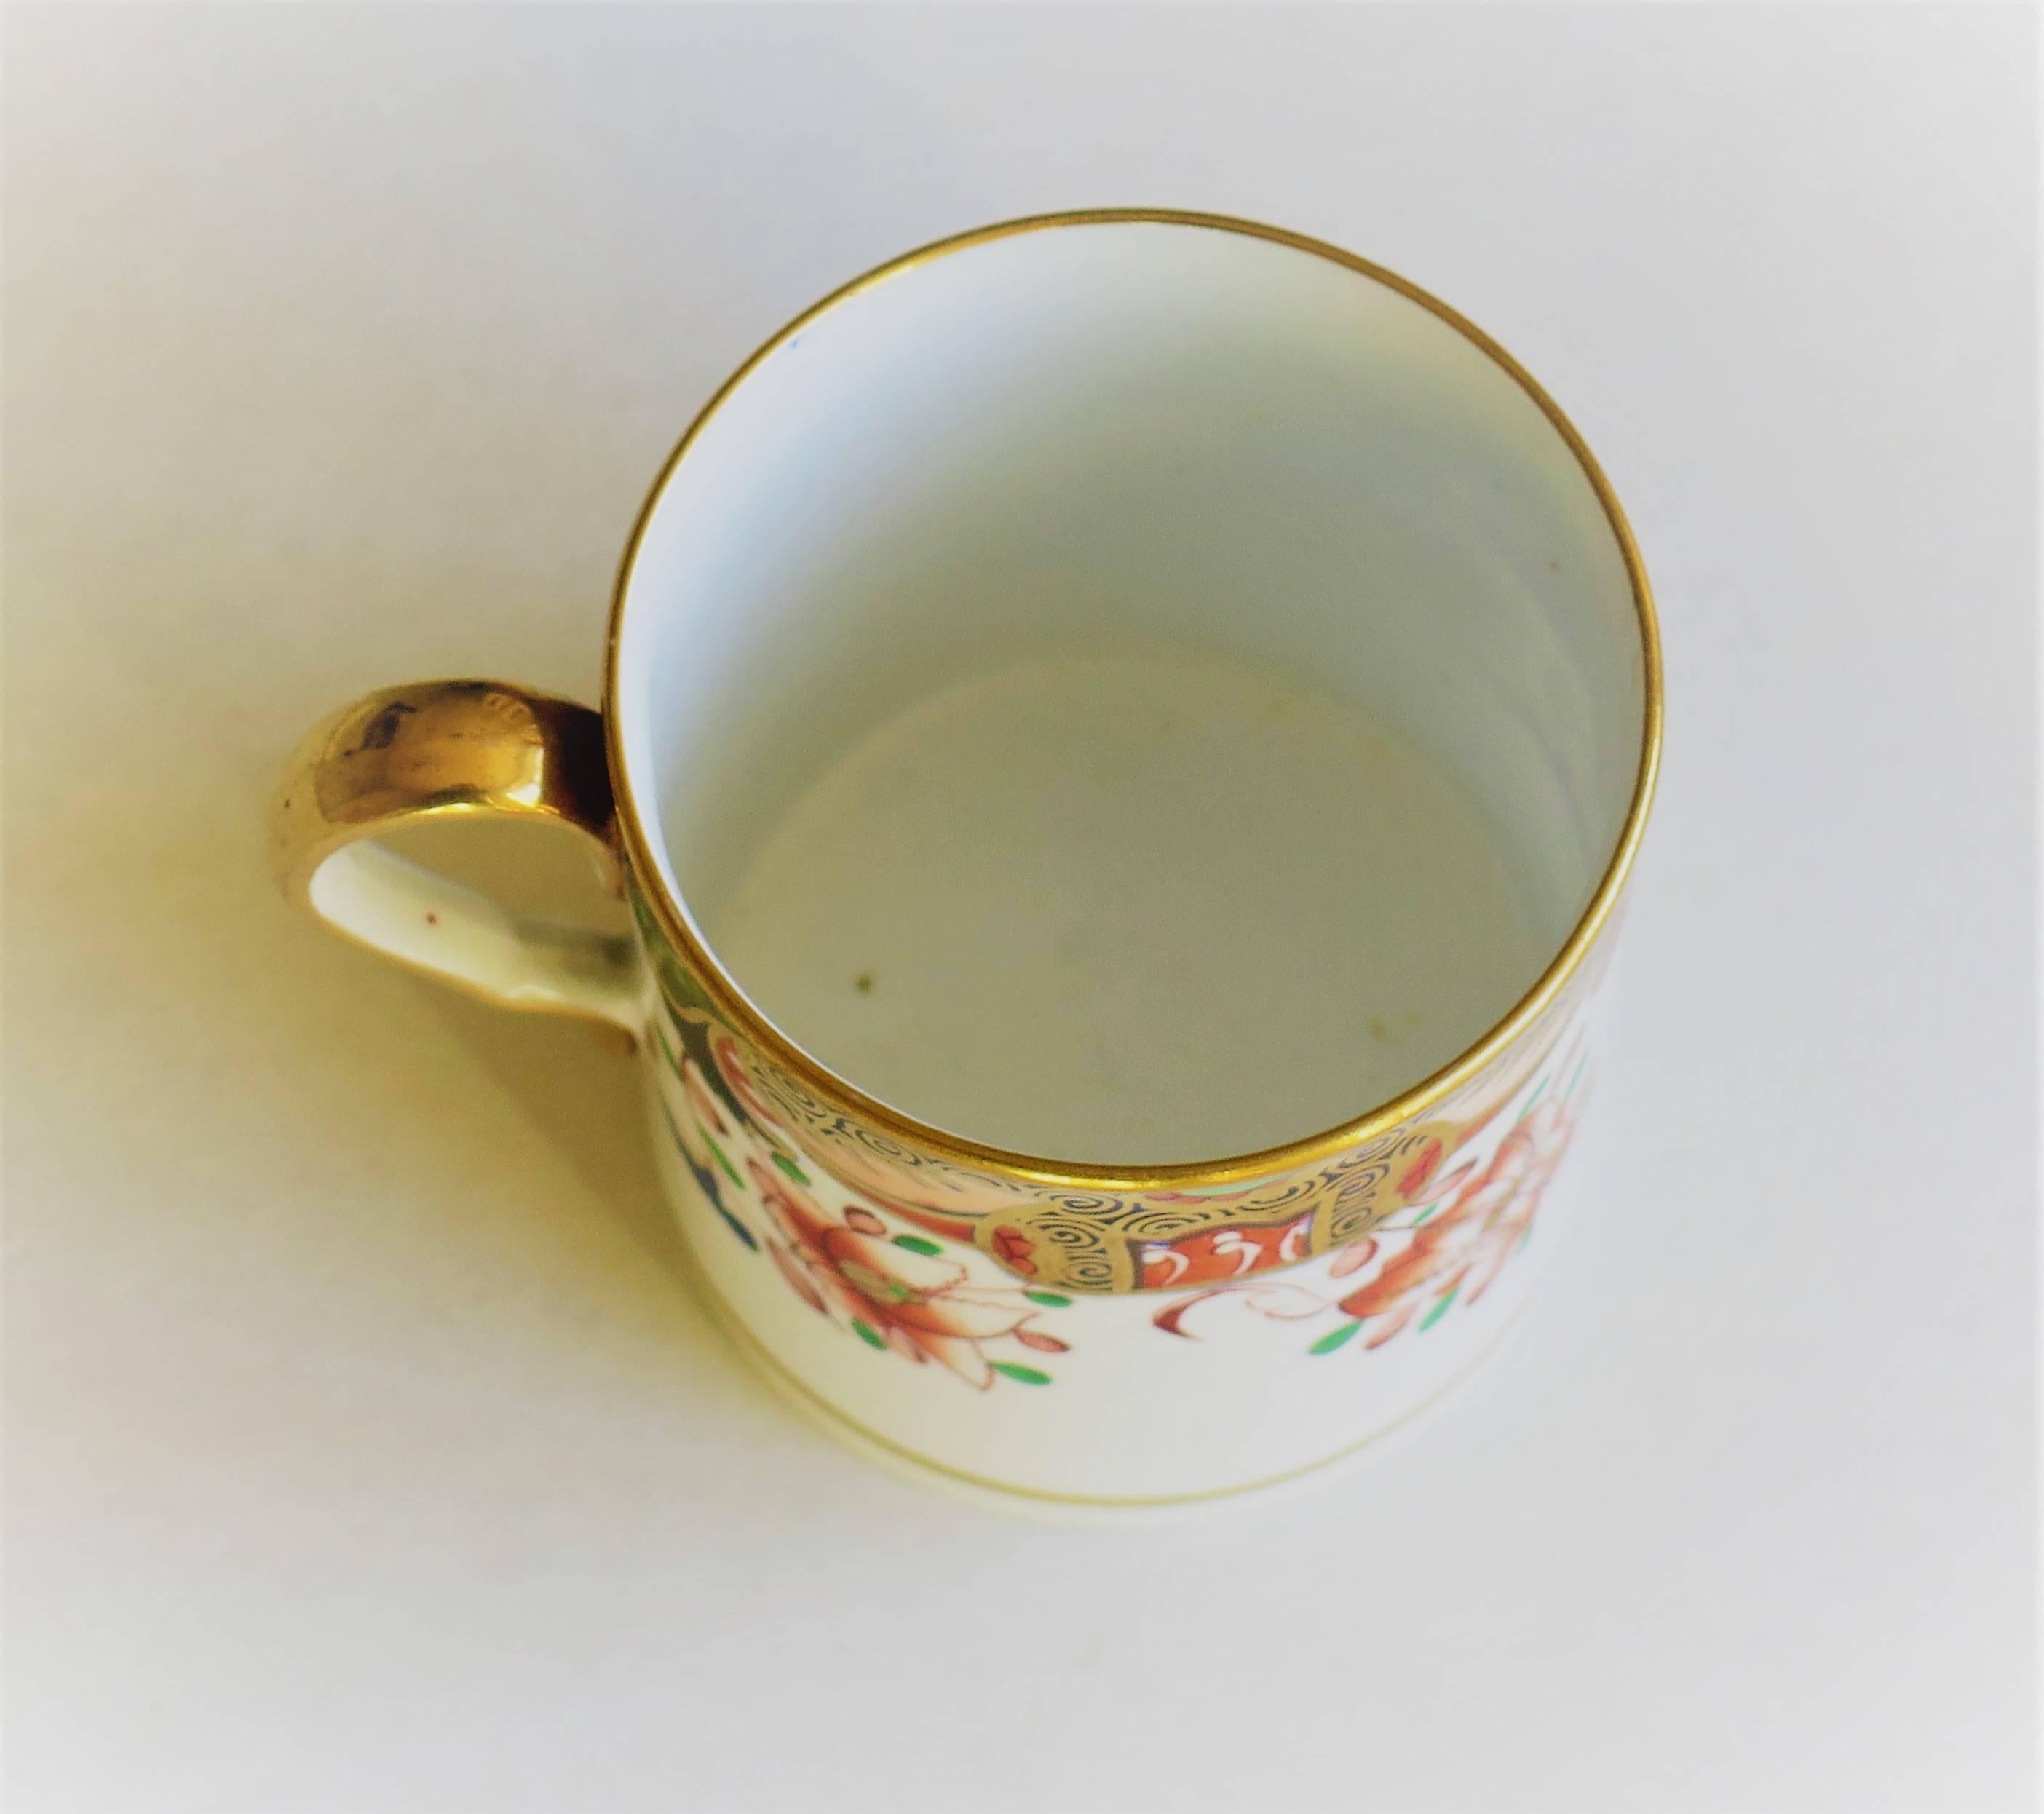 English Spode Porcelain Coffee Can Pattern 1645 marked Spode to base, Circa 1810